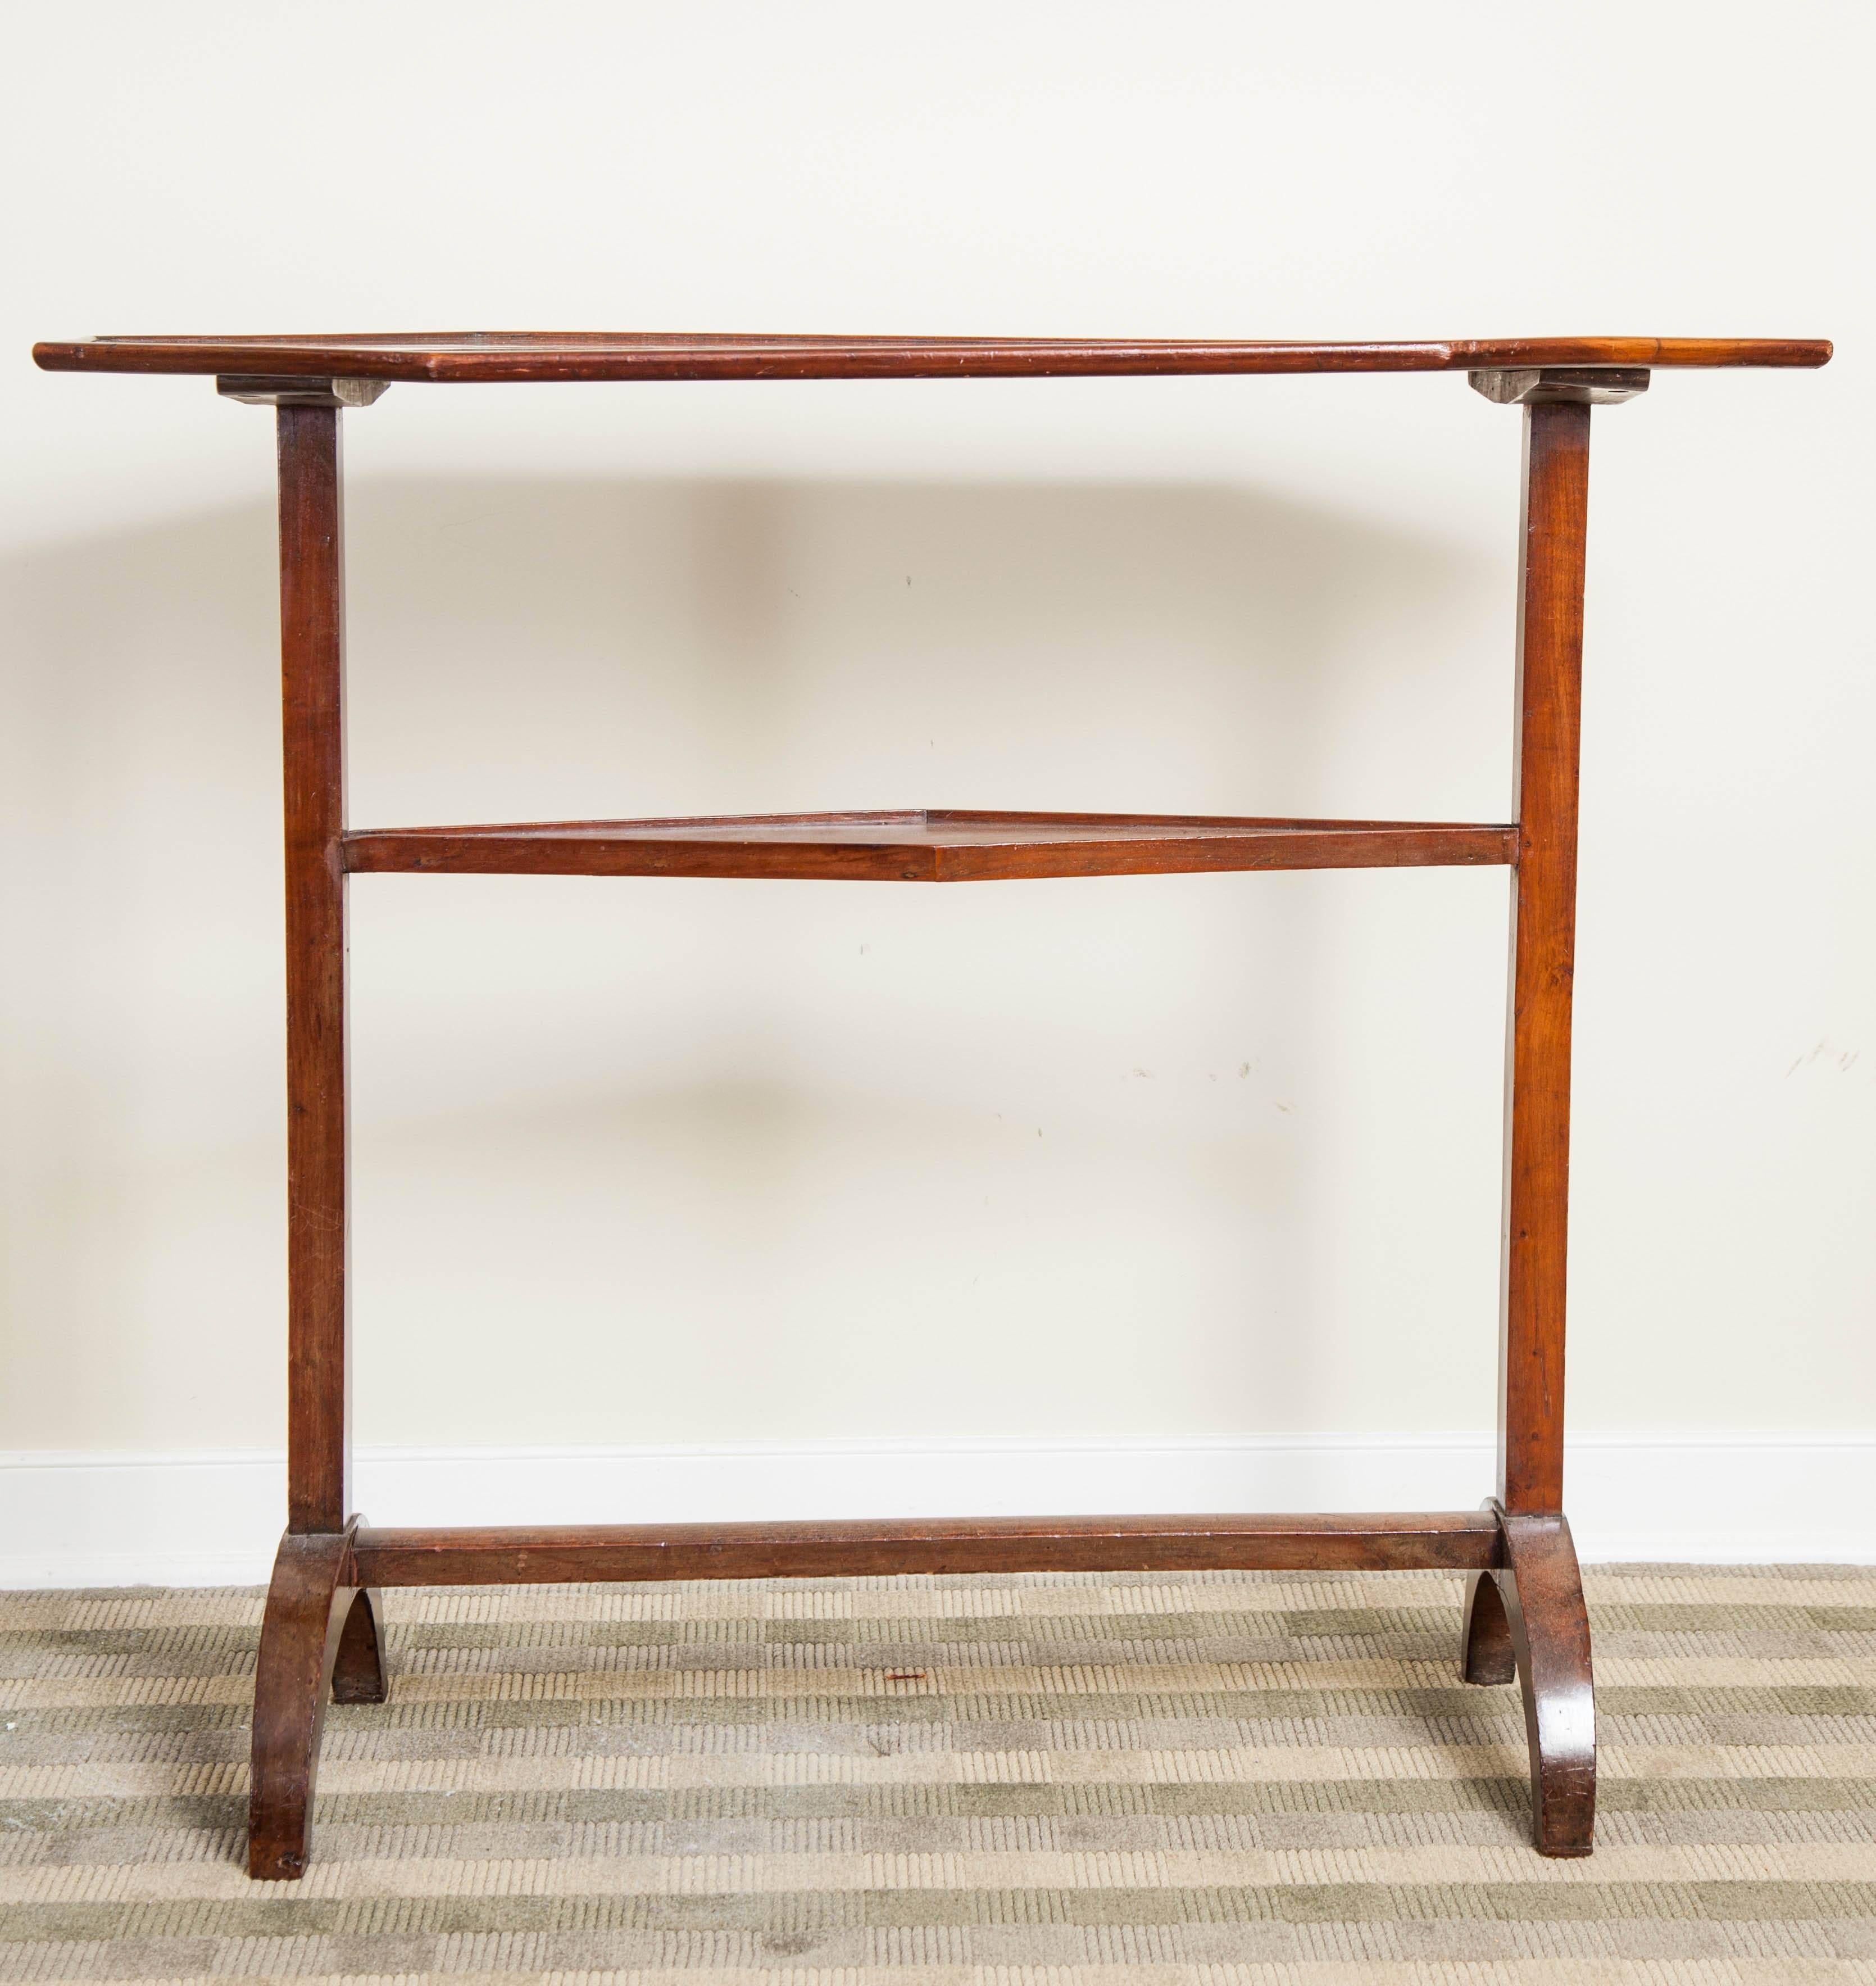 Directoire mahogany trestle table, early 19th century. An octagonal top with lower shelf table.